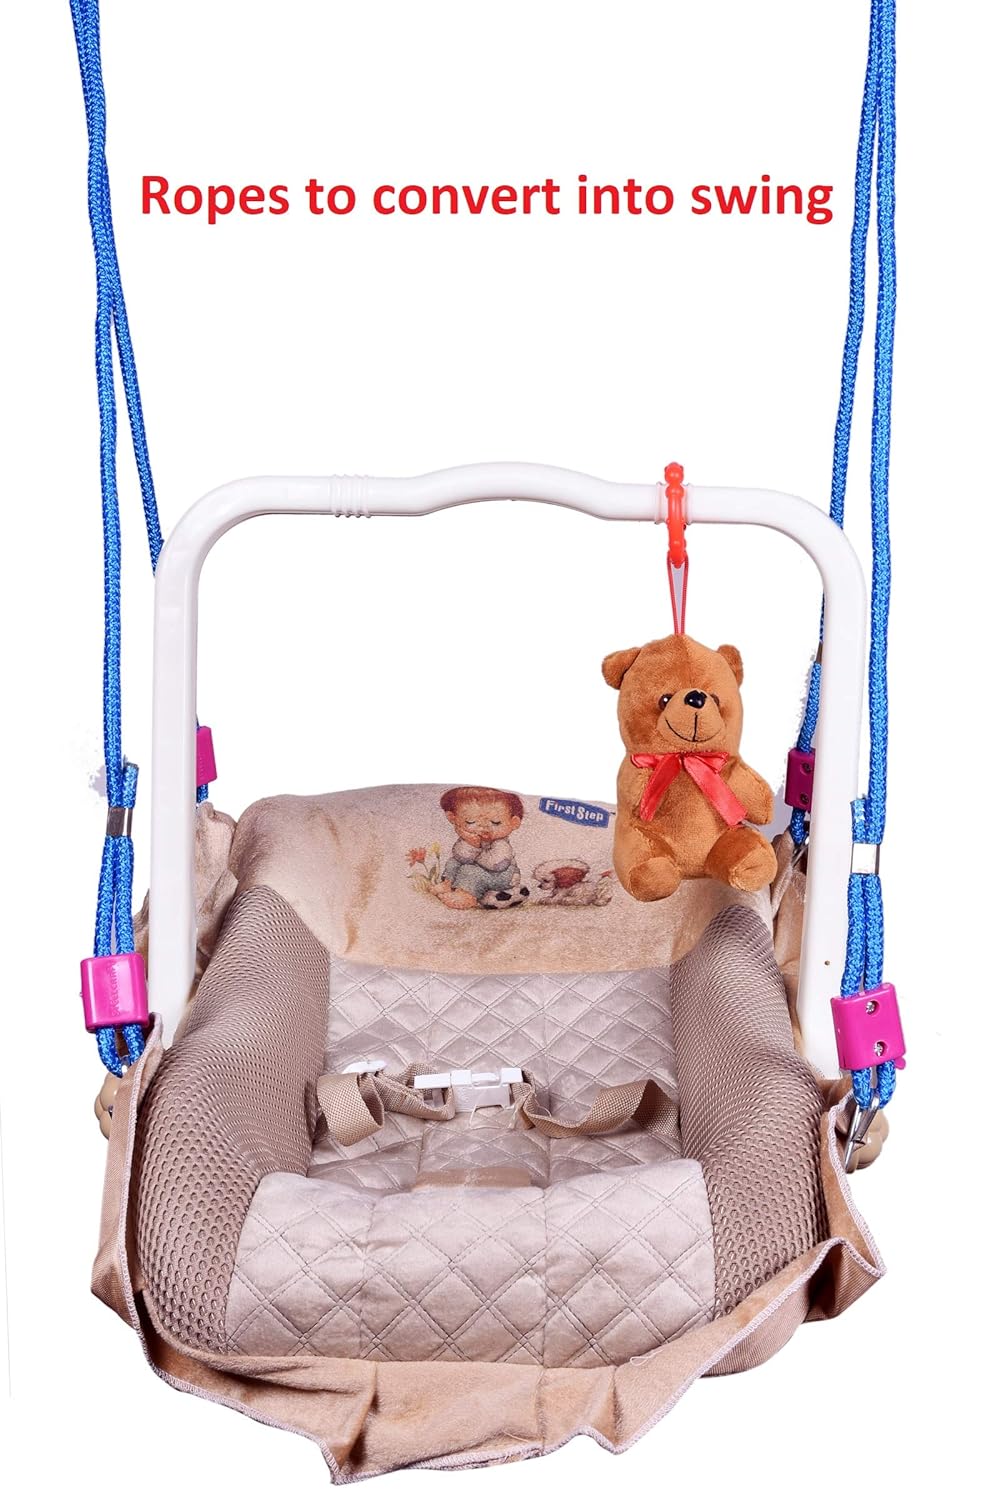 Premium Musical Baby Swing Rocker Carry Cot Cum Bouncer with Mosquito Net, Storage Box and Swinging Ropes